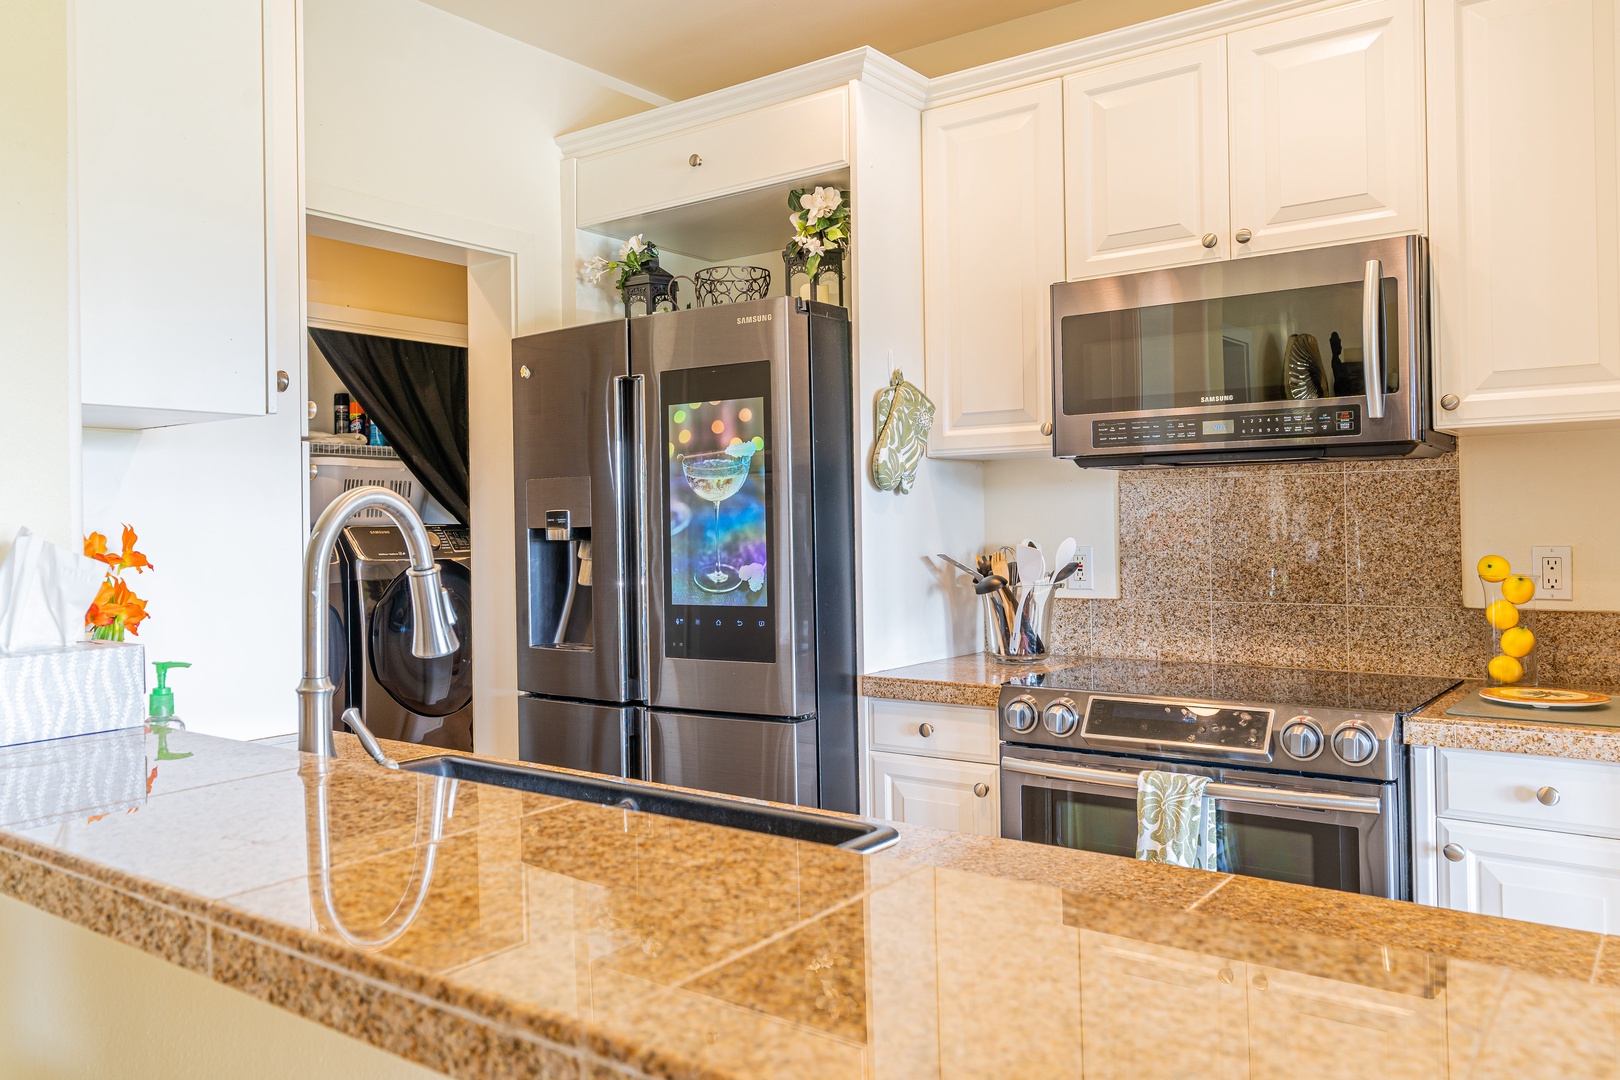 Kapolei Vacation Rentals, Coconut Plantation 1086-4 - A gorgeous kitchen with stainless steel appliances.